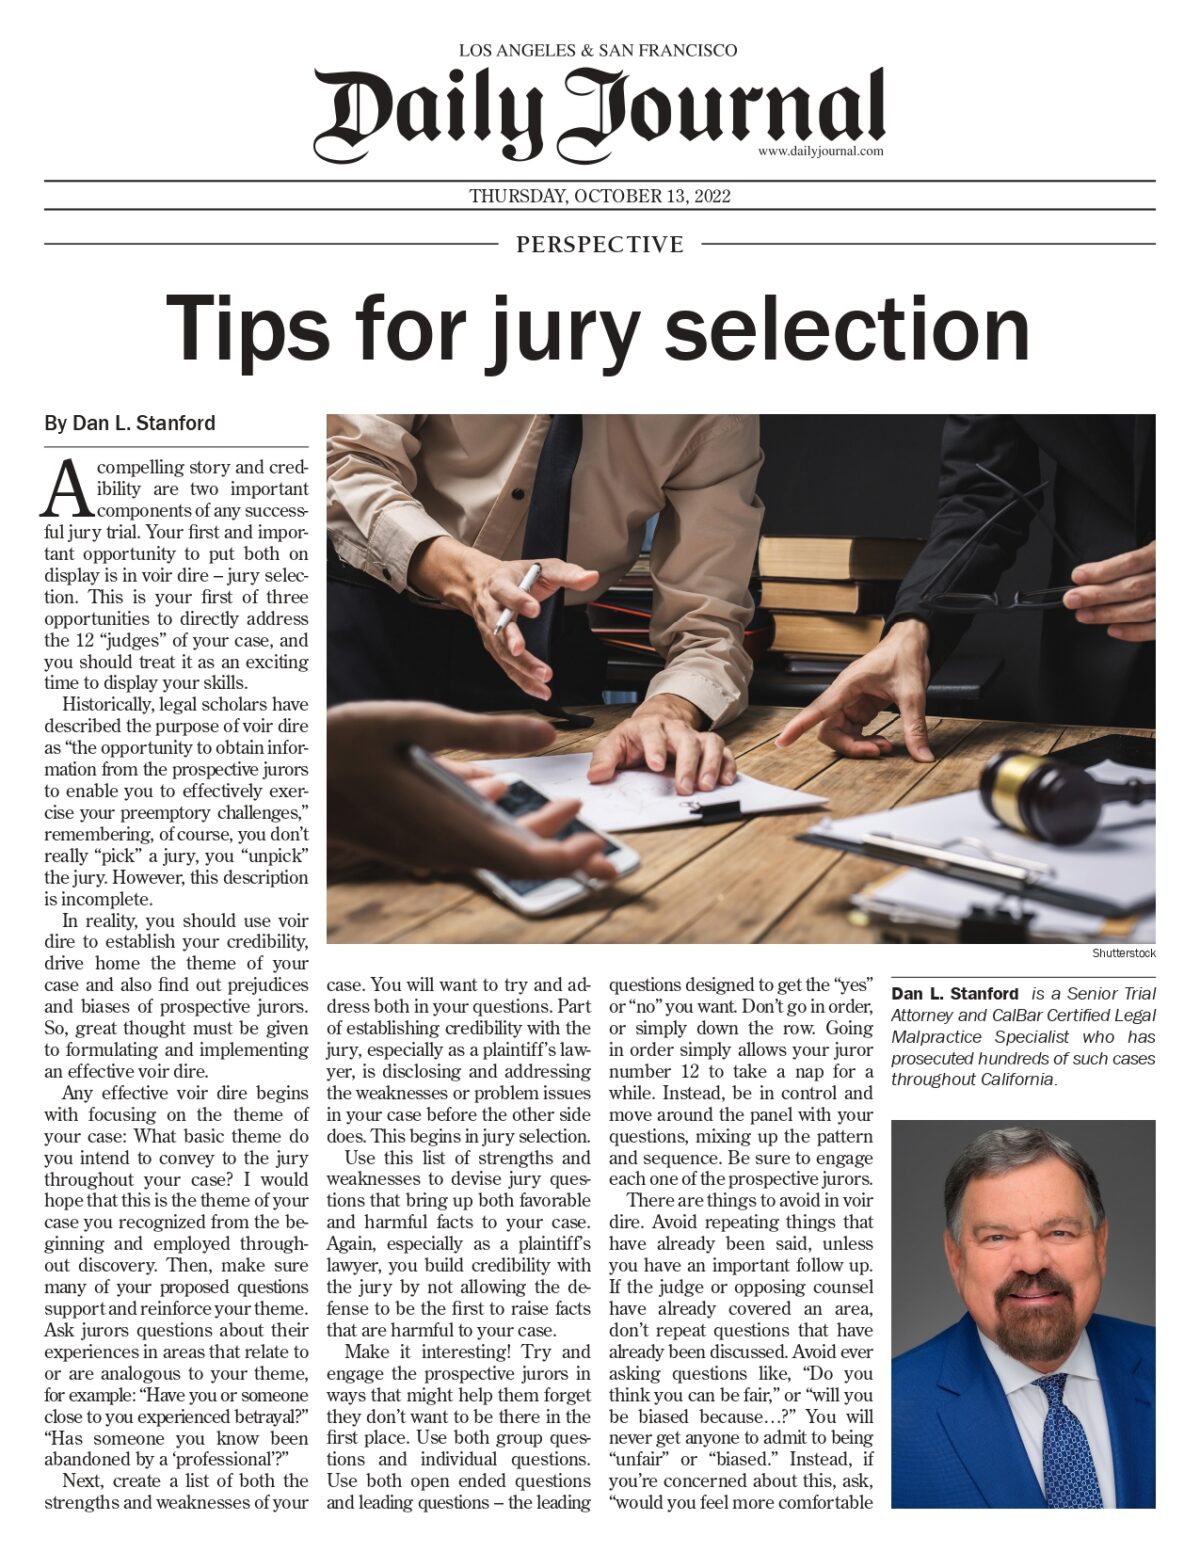 Tips for jury selection